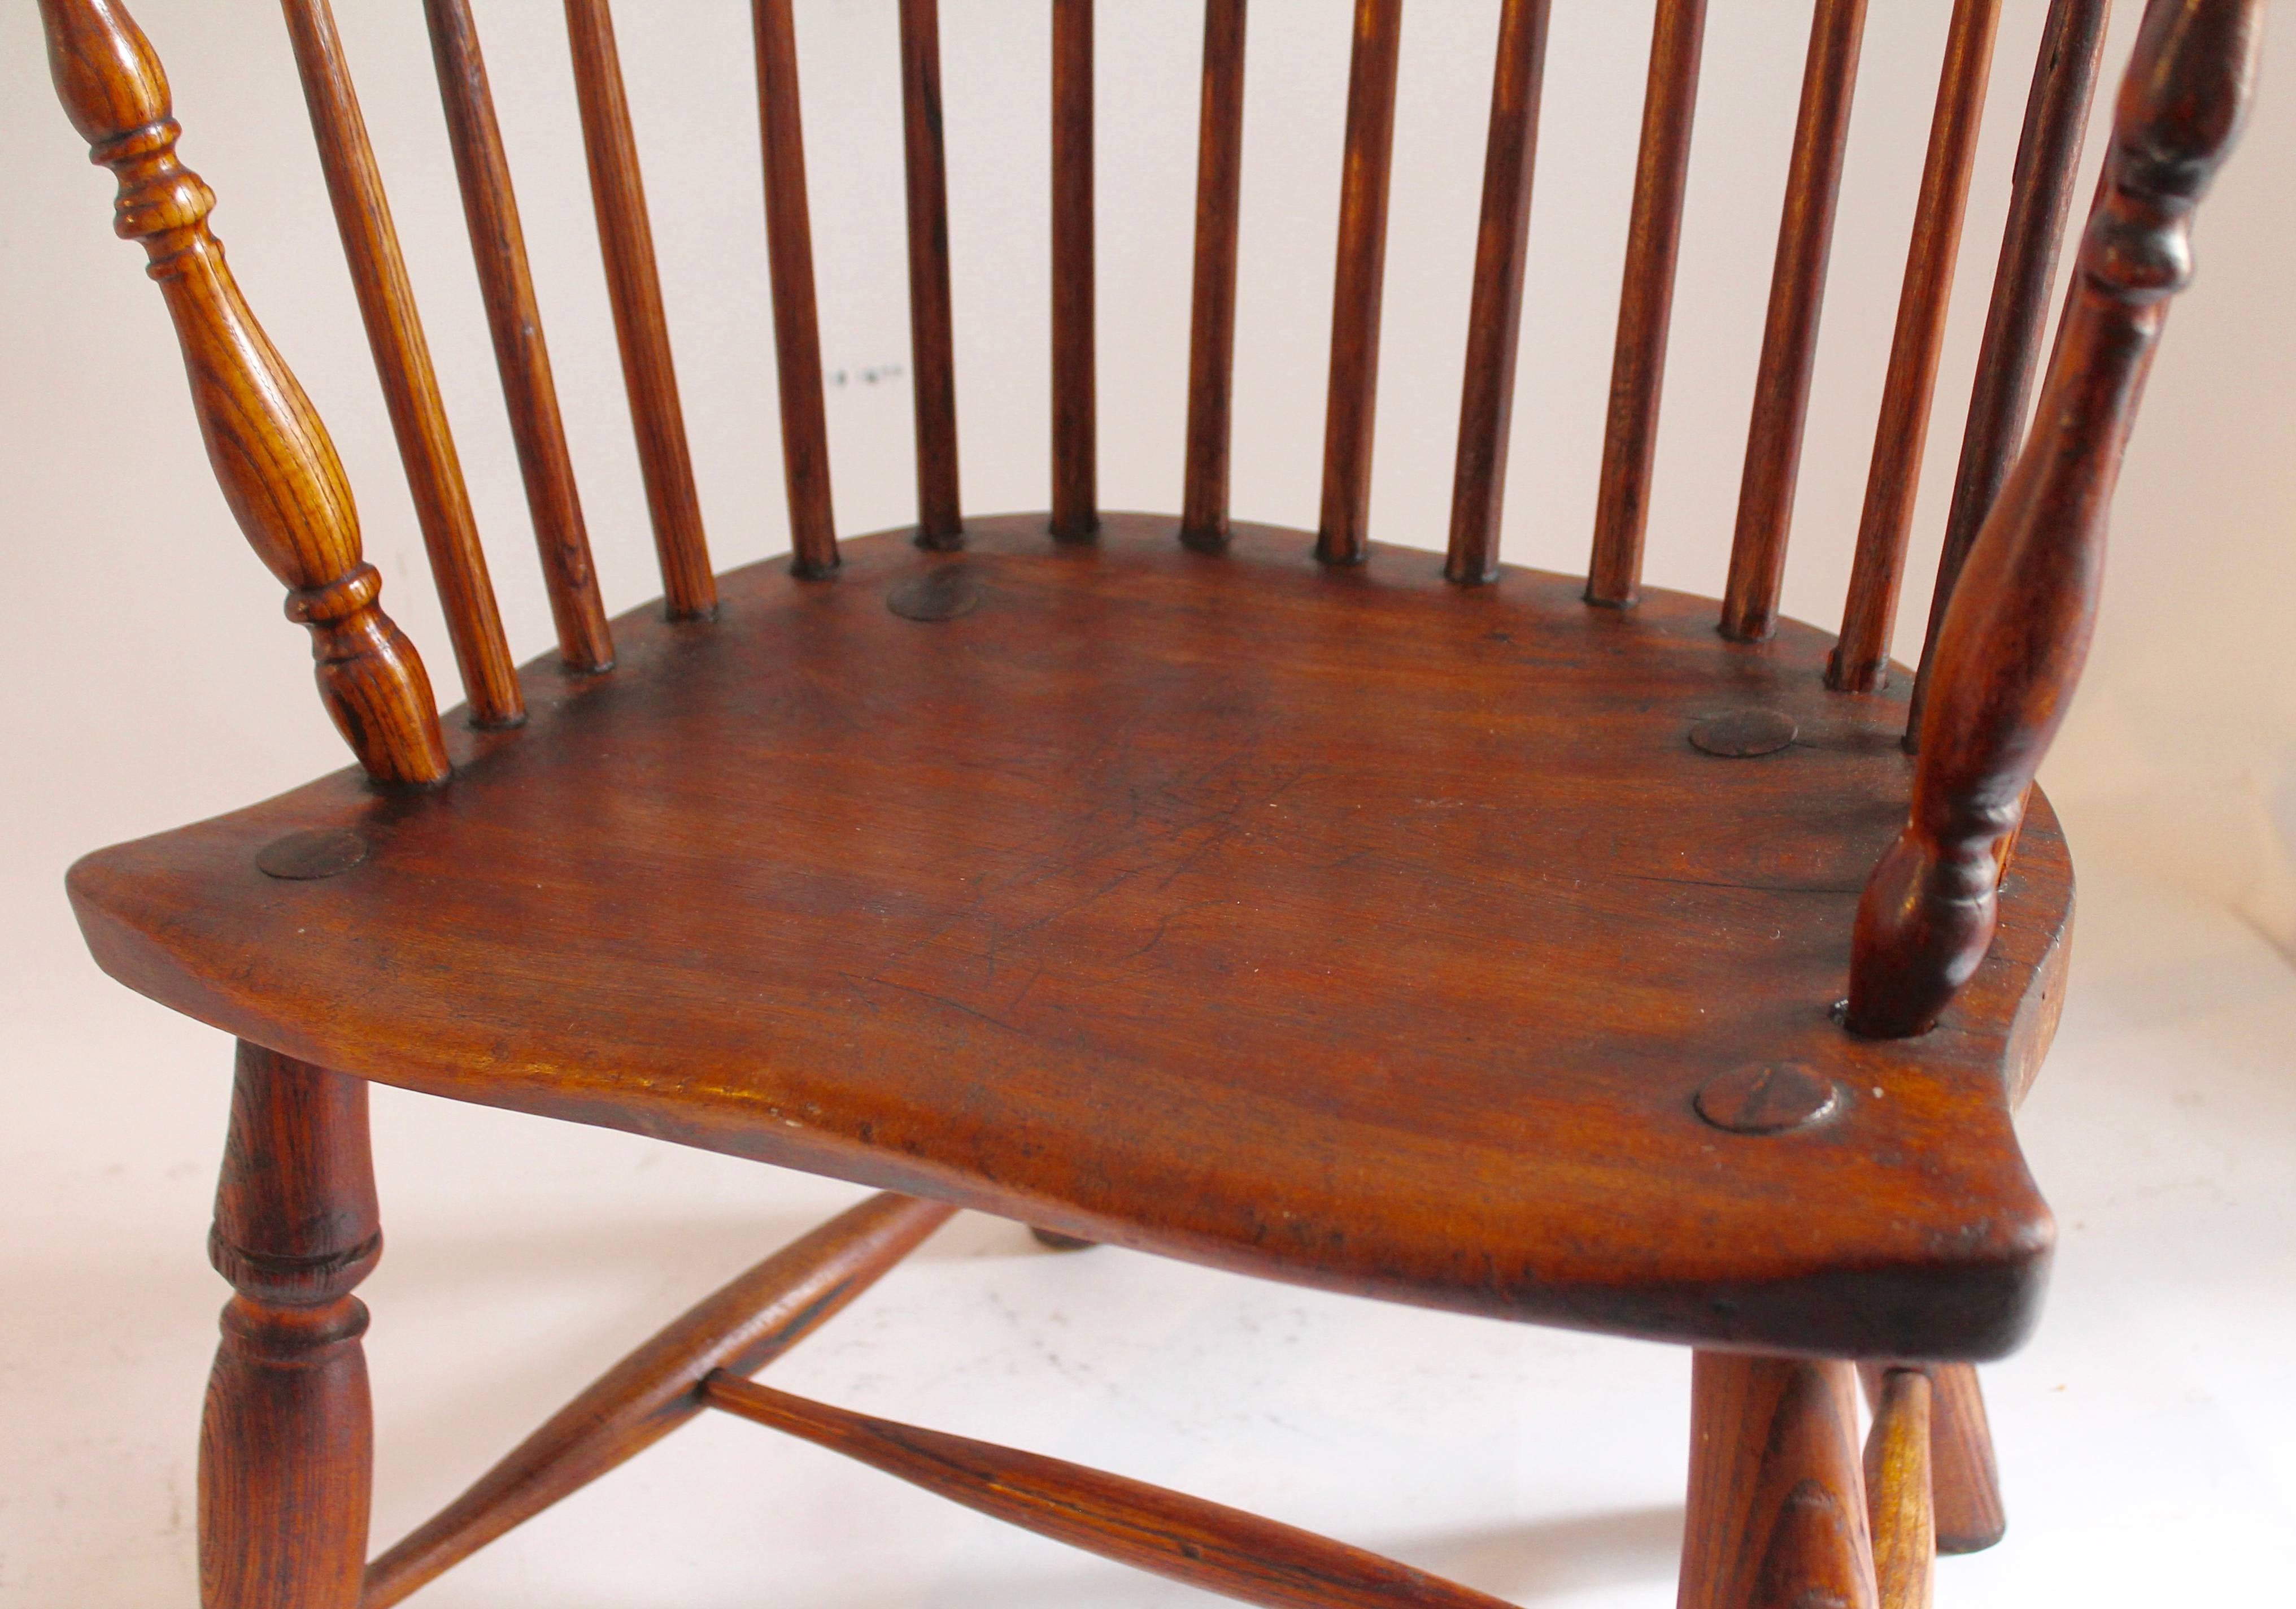 This fine and very comfortable Windsor chair is in good condition but has some minor old repairs. The backside bow has an old iron repair but is fine the way it is. Funky old repairs are great on these wonderful worn wonders. Great functional look!